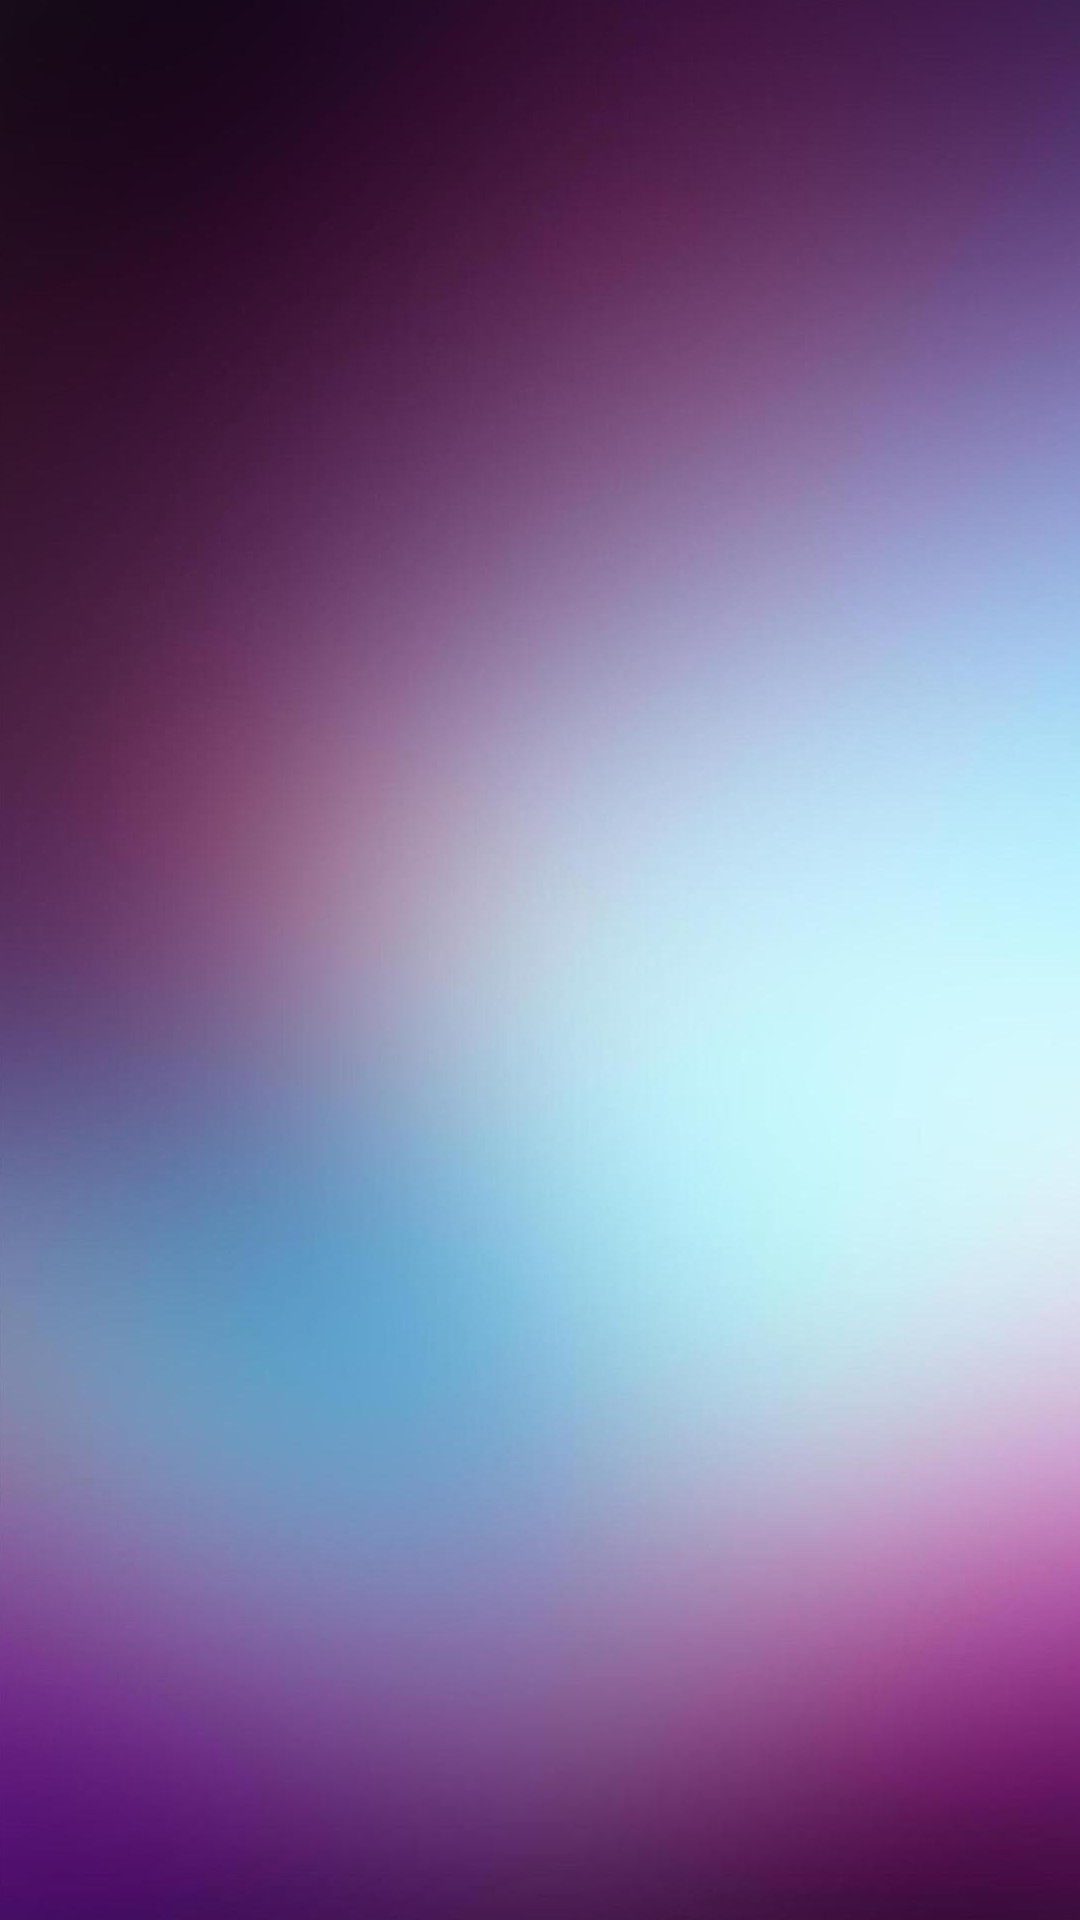 Free download Simple Background Simple background nexus 5 [1080x1920 ...